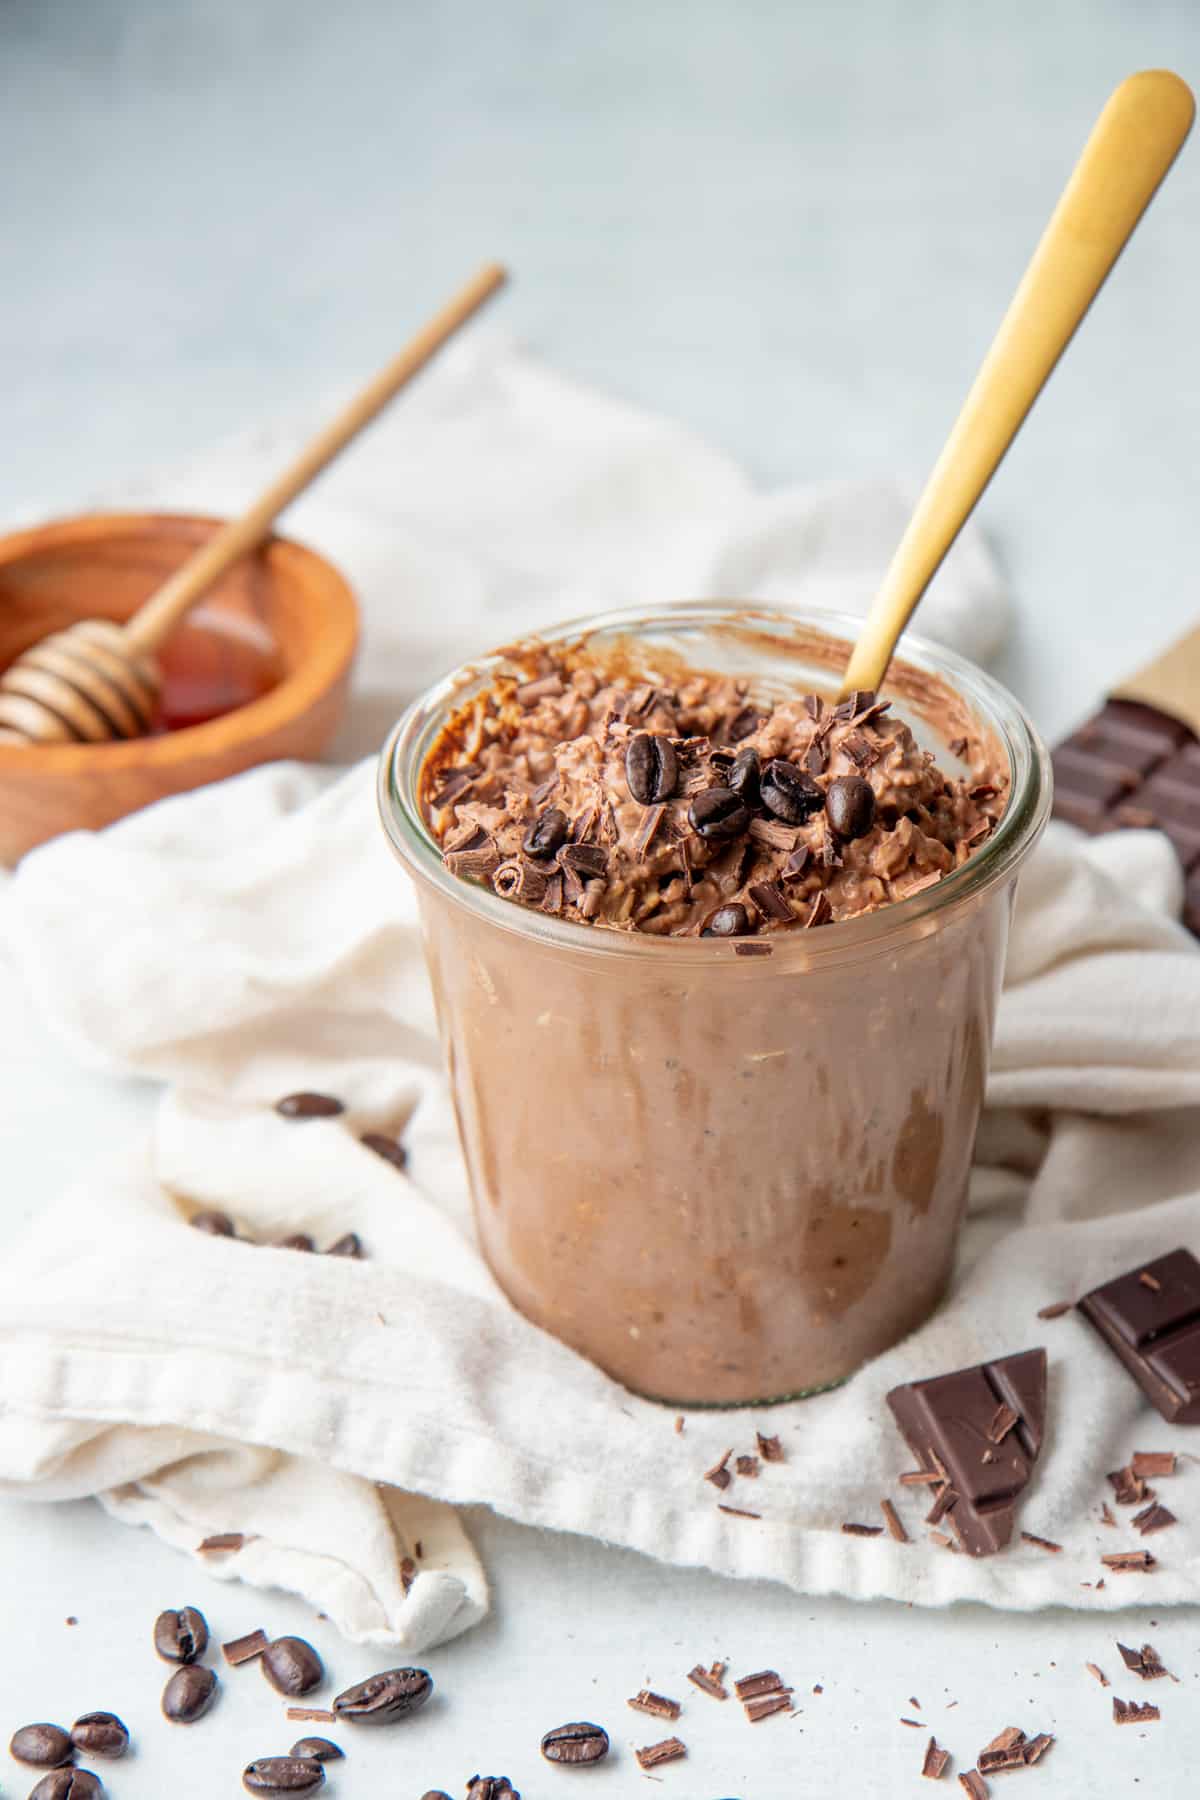 A gold spoon rests in a jar of chocolate overnight oats. A small bowl of honey also sits on the white dishtowel.